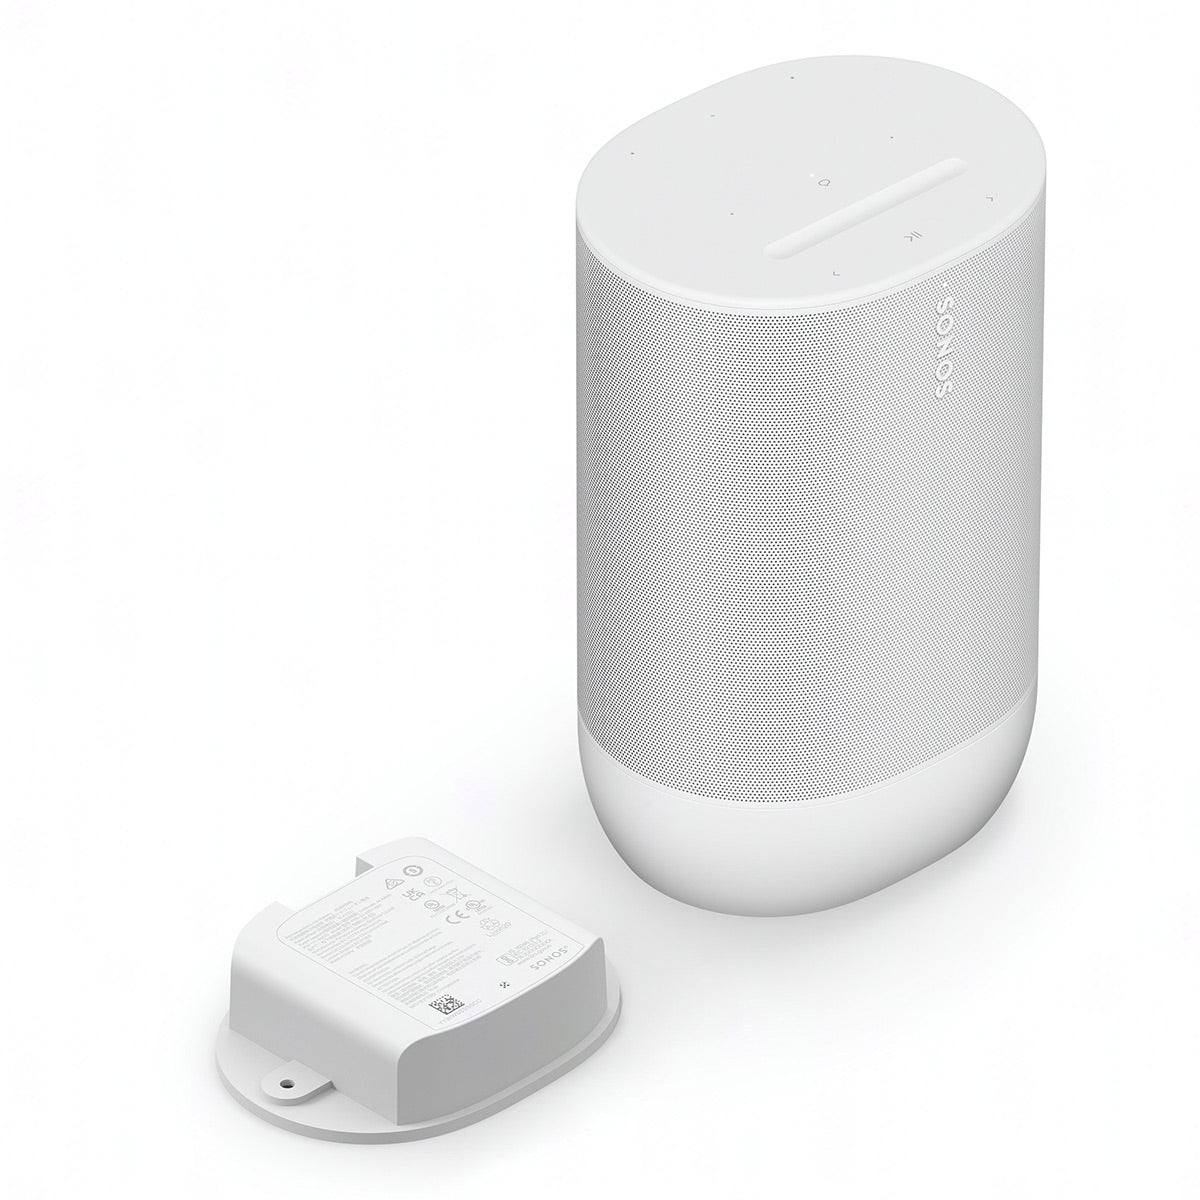 Sonos and Portable Move Battery Speaker Wide | Wi-Fi Life, (White) 24-Hour World 2 Smart with Stereo Bluetooth,